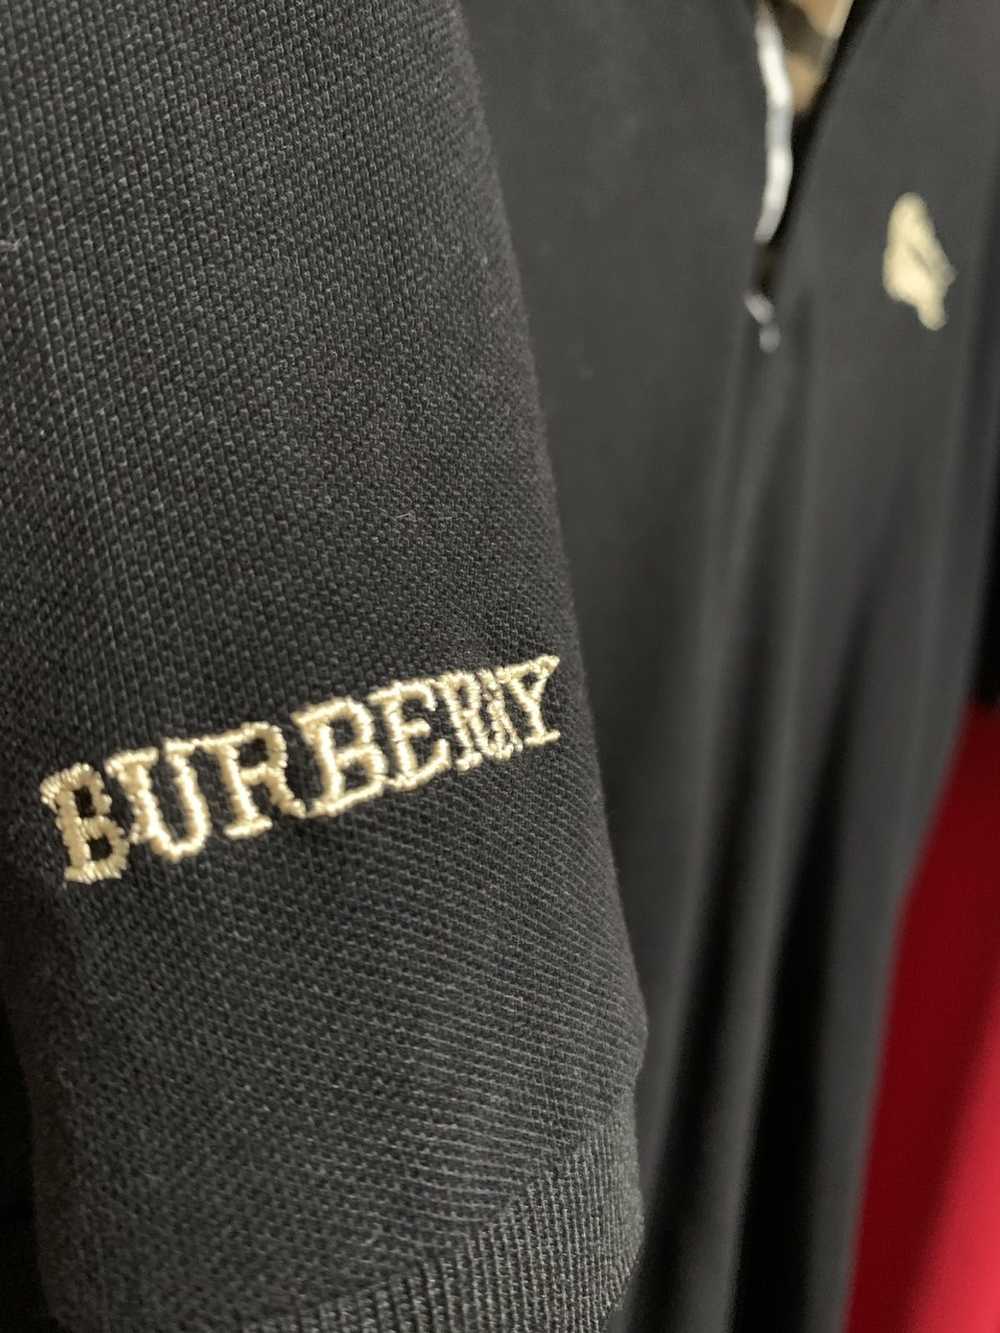 Burberry Burberry London Button Up - image 2